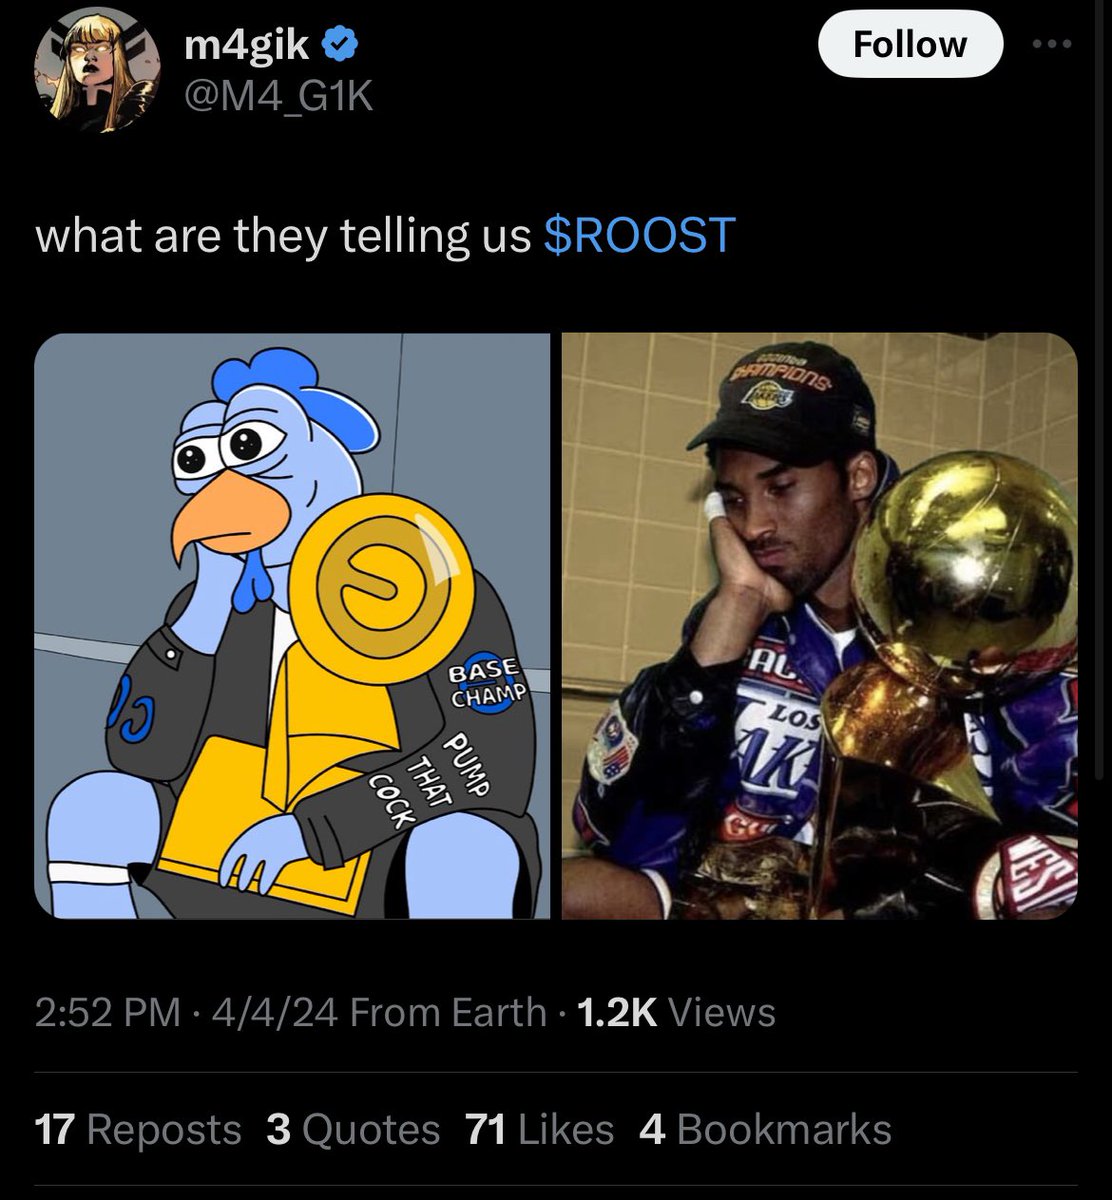 $roost- seeing a lot of basketball-related meme 1. Partnership with nba team?? 2. Advertise $roost during nba playoff? 3. $roost / base logo on nba jersey? Thought? Check out @RoostCoin if you haven’t